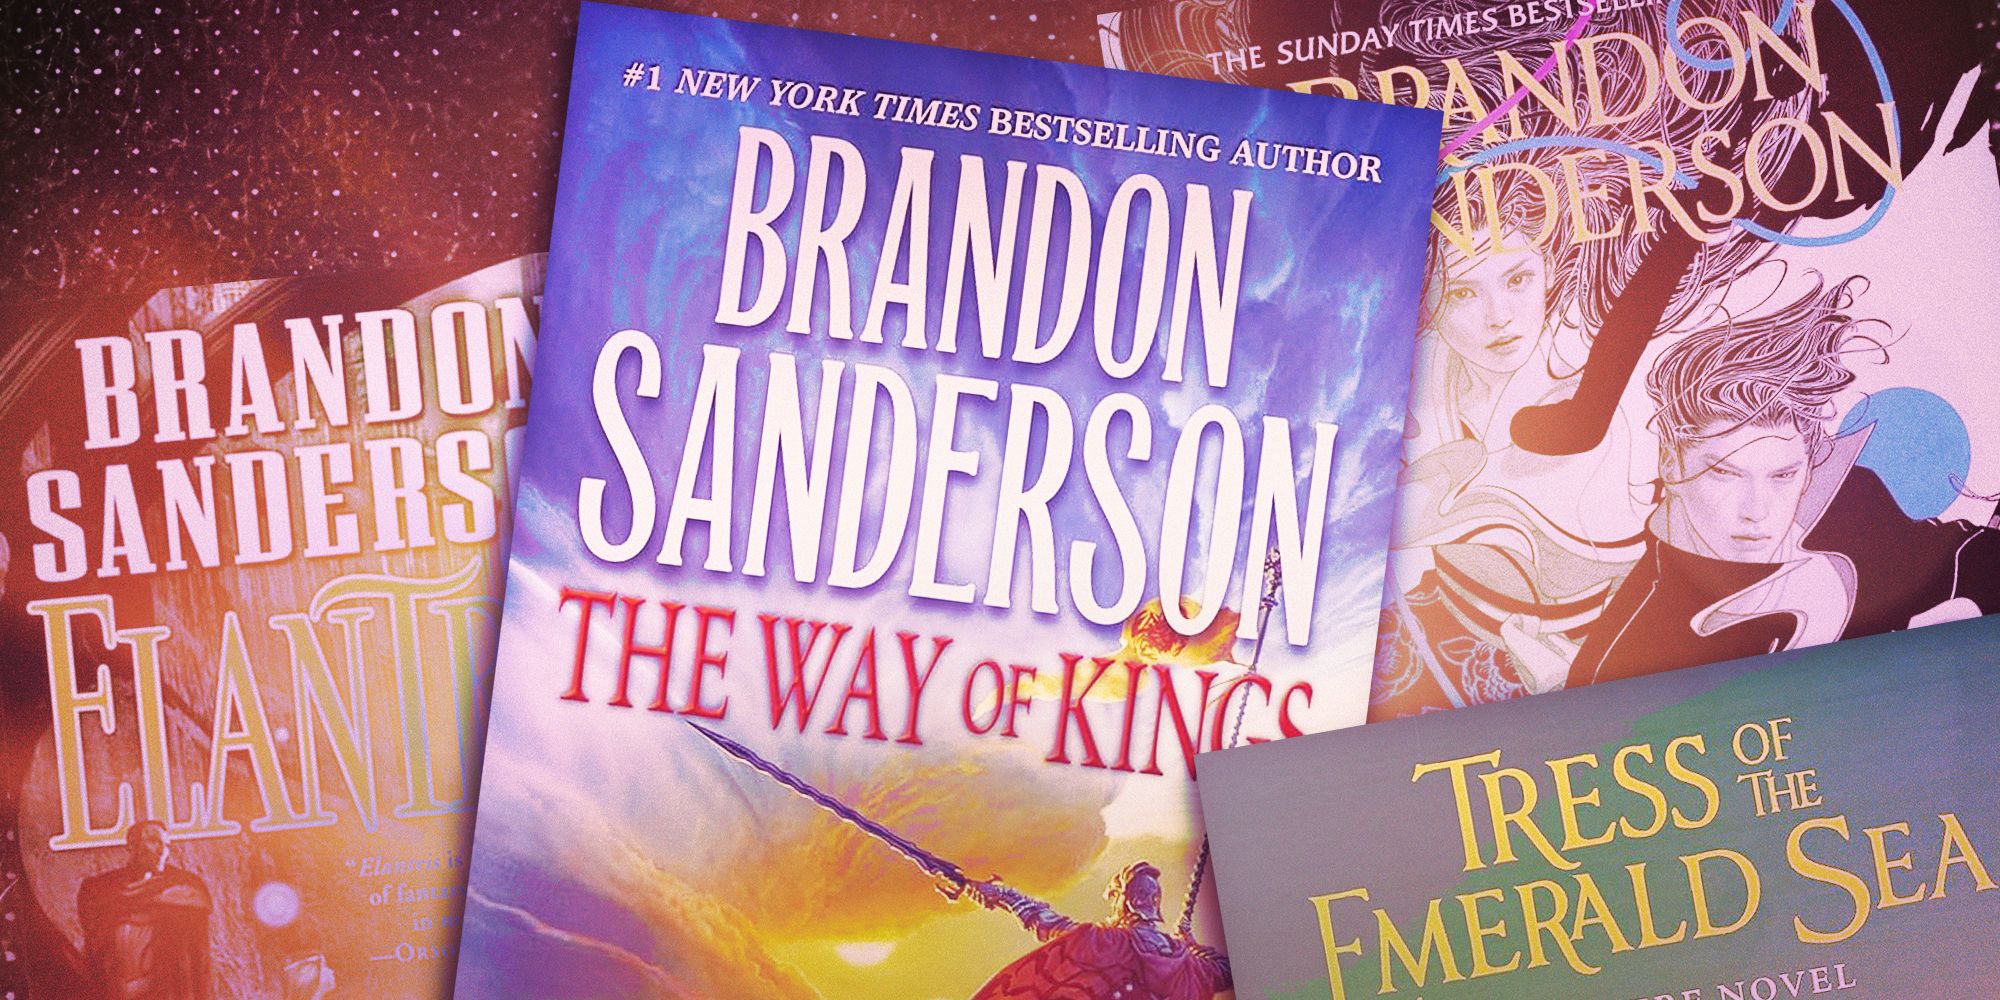 A collage of Cosmere books by Brandon Sanderson, from left to right: Elantris, The Way of Kings, Tress of the Emerald Sea, and Yumi and the Nightmare Painter